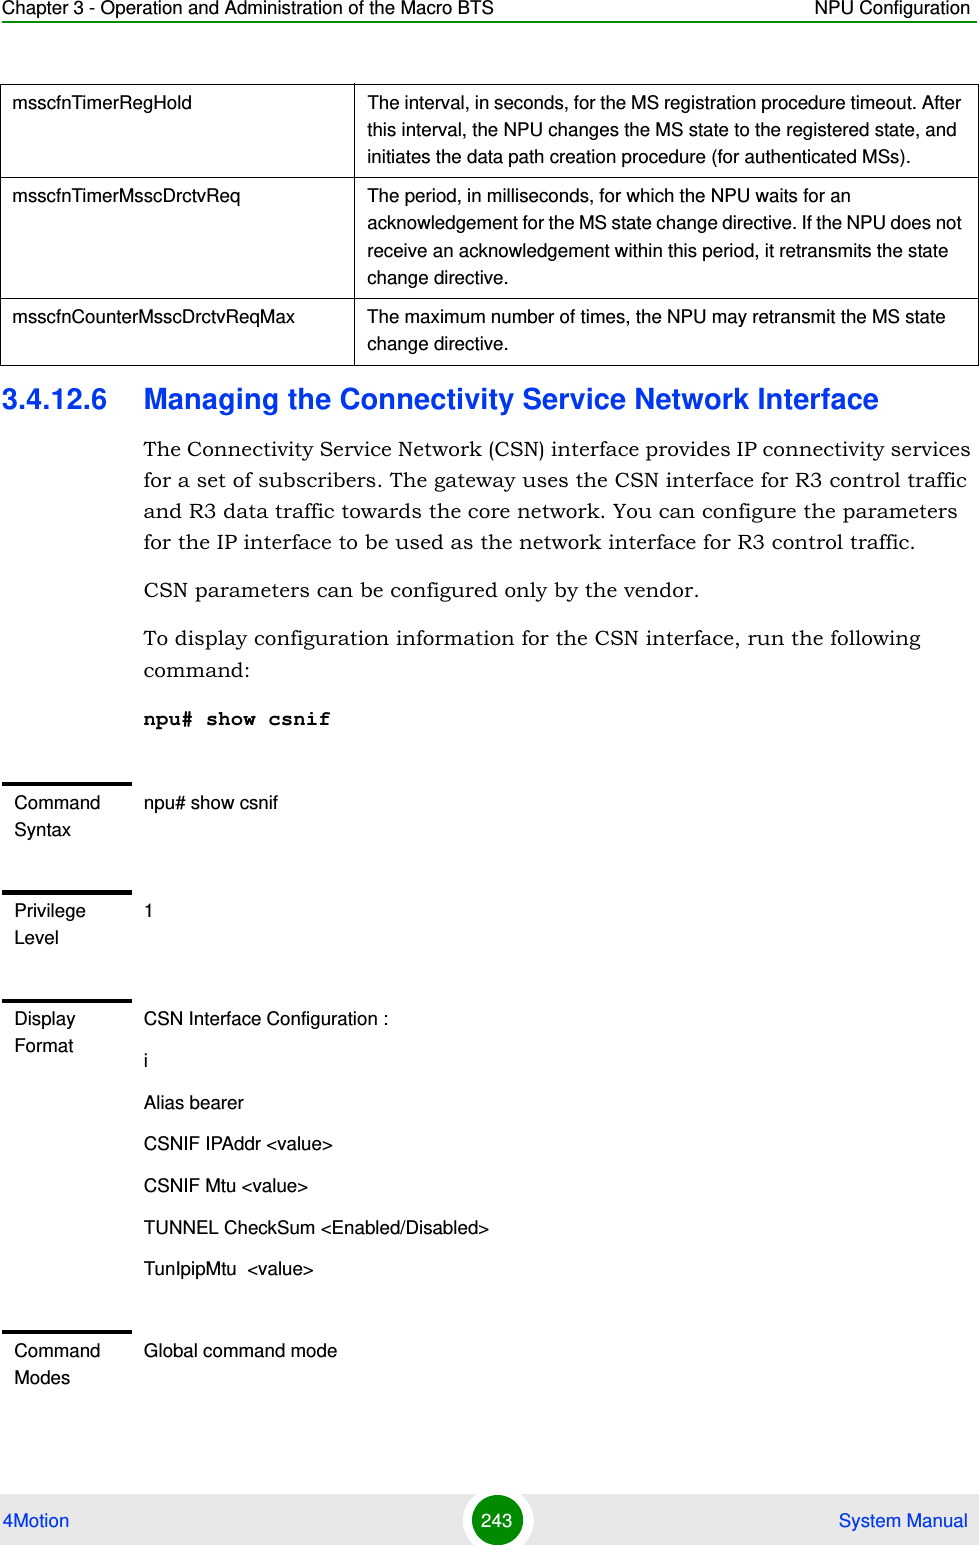 Chapter 3 - Operation and Administration of the Macro BTS NPU Configuration4Motion 243  System Manual3.4.12.6 Managing the Connectivity Service Network InterfaceThe Connectivity Service Network (CSN) interface provides IP connectivity services for a set of subscribers. The gateway uses the CSN interface for R3 control traffic and R3 data traffic towards the core network. You can configure the parameters for the IP interface to be used as the network interface for R3 control traffic. CSN parameters can be configured only by the vendor.To display configuration information for the CSN interface, run the following command:npu# show csnifmsscfnTimerRegHold The interval, in seconds, for the MS registration procedure timeout. After this interval, the NPU changes the MS state to the registered state, and initiates the data path creation procedure (for authenticated MSs).msscfnTimerMsscDrctvReq The period, in milliseconds, for which the NPU waits for an acknowledgement for the MS state change directive. If the NPU does not receive an acknowledgement within this period, it retransmits the state change directive.msscfnCounterMsscDrctvReqMax The maximum number of times, the NPU may retransmit the MS state change directive.Command Syntaxnpu# show csnifPrivilege Level1Display FormatCSN Interface Configuration :iAlias bearerCSNIF IPAddr &lt;value&gt;CSNIF Mtu &lt;value&gt;TUNNEL CheckSum &lt;Enabled/Disabled&gt;TunIpipMtu  &lt;value&gt;Command ModesGlobal command mode